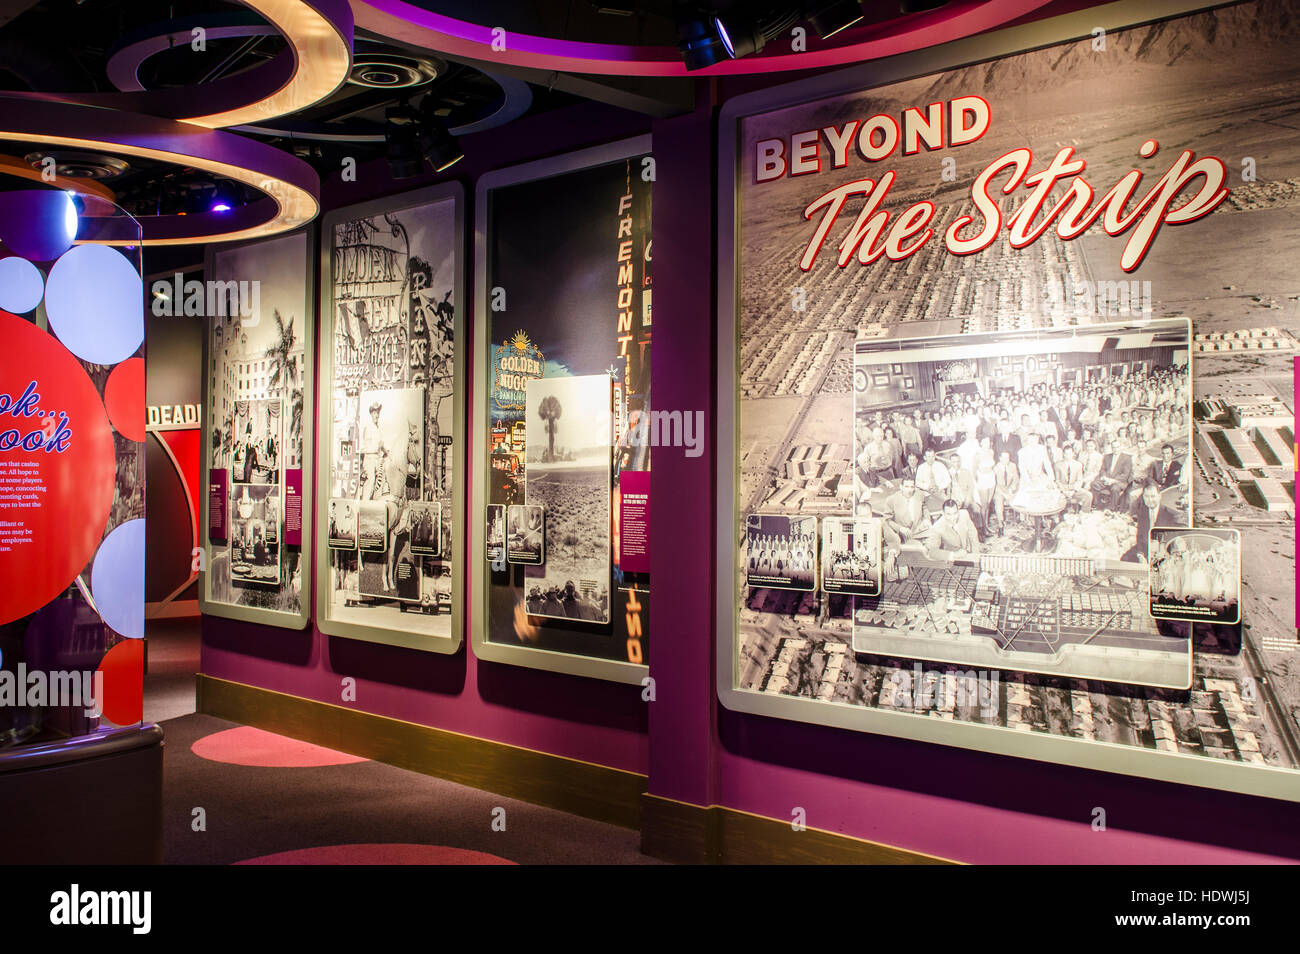 Exhibits and displays in The Mob Museum Las Vegas, Nevada. Stock Photo